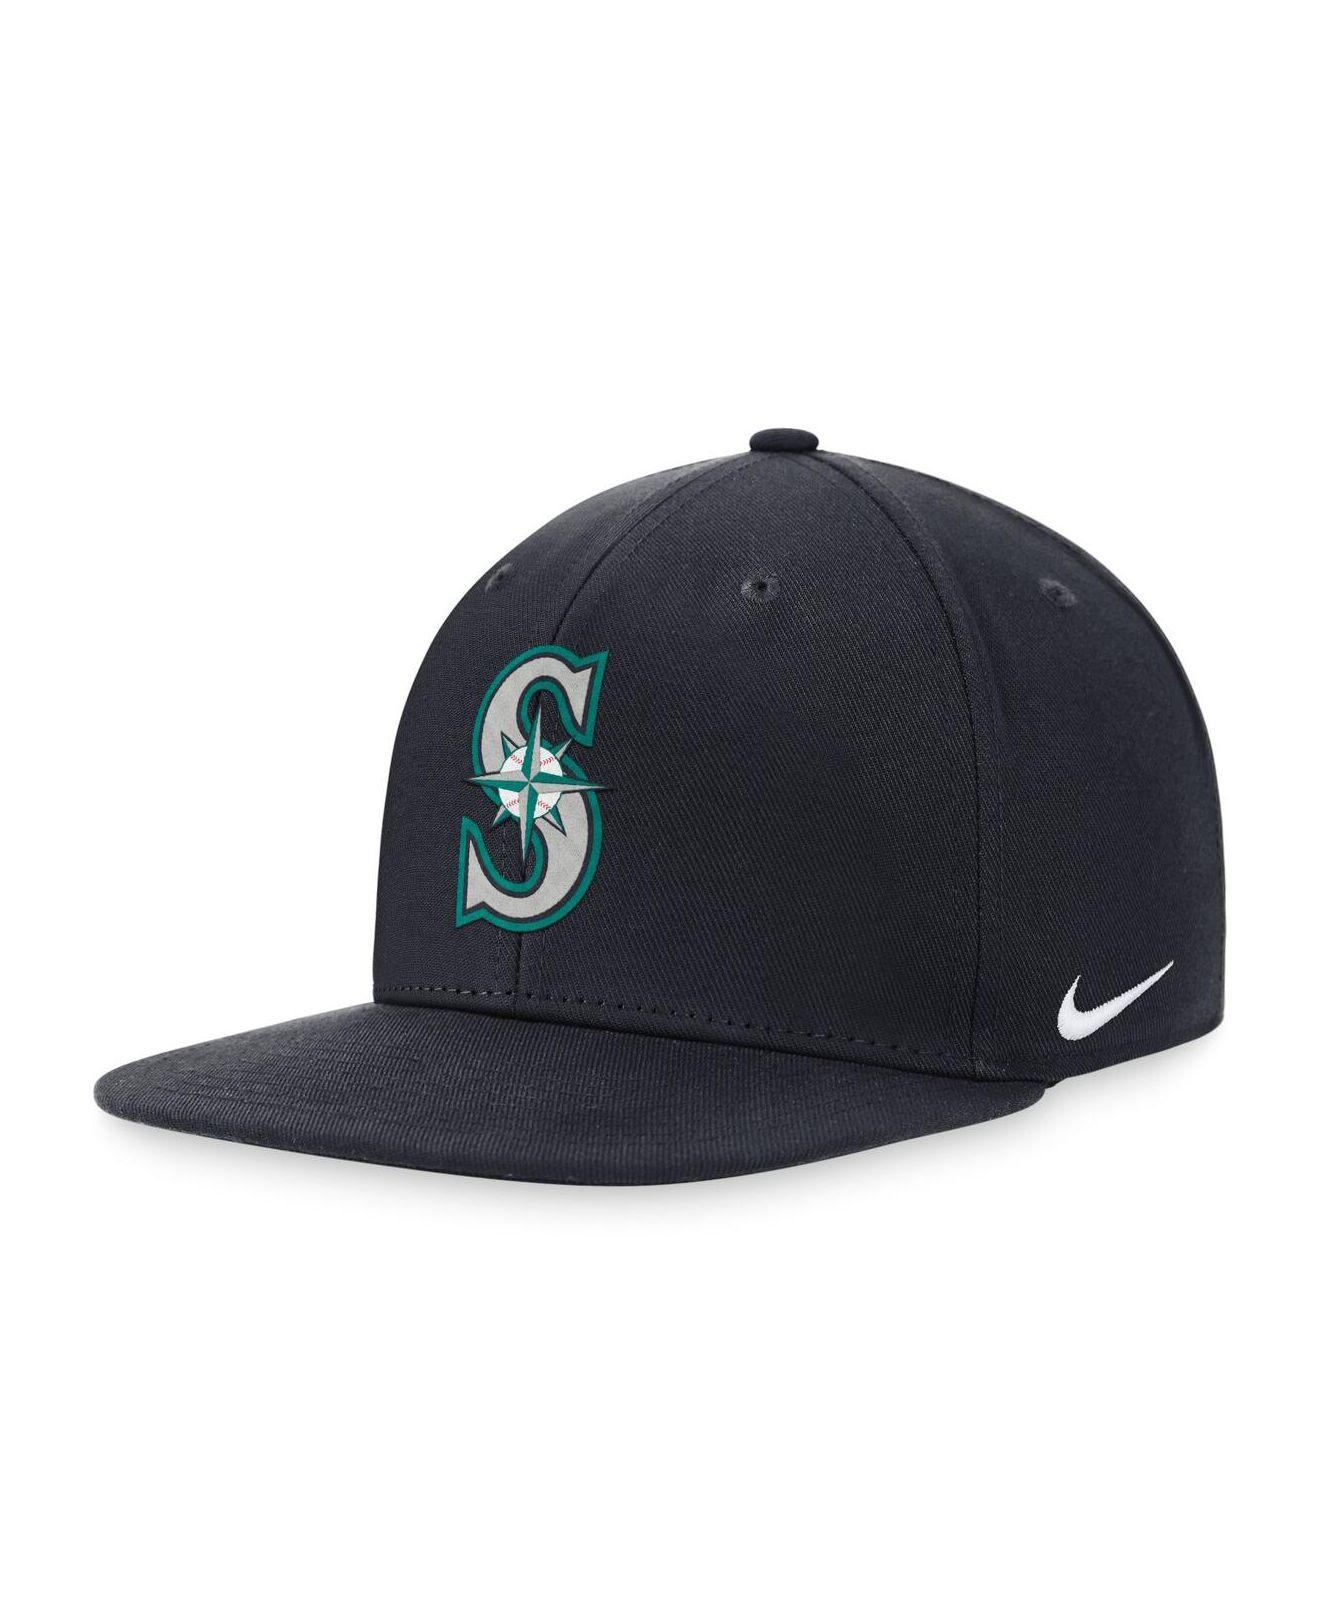 Seattle Mariners Nike Cooperstown Collection Heritage86 Adjustable